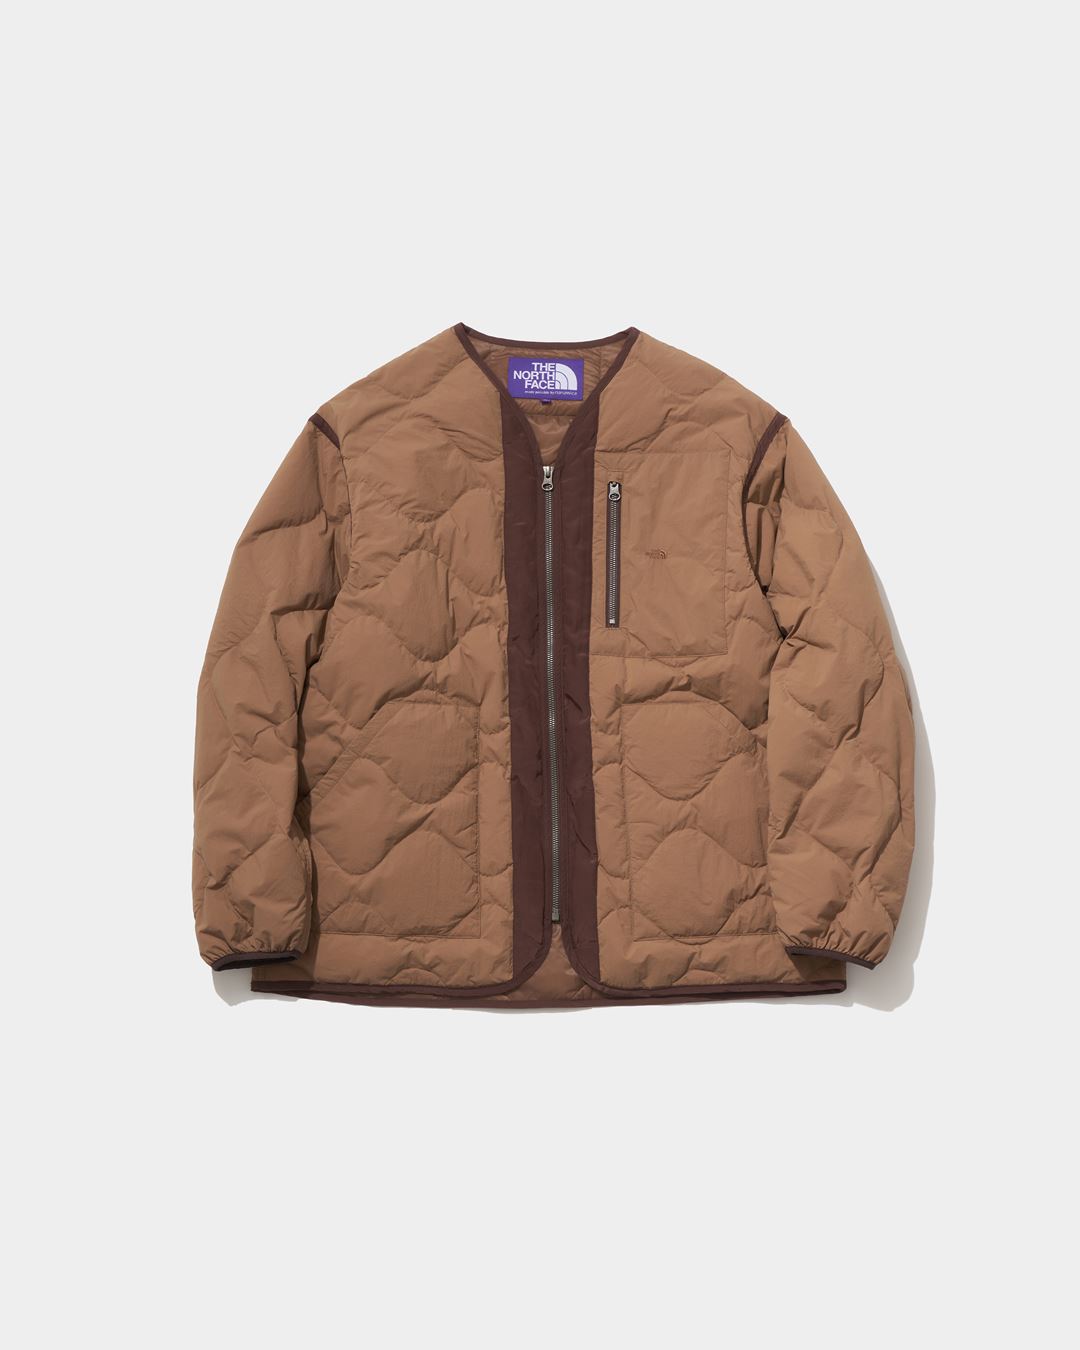 nanamica / THE NORTH FACE PURPLE LABEL / Featured Product 